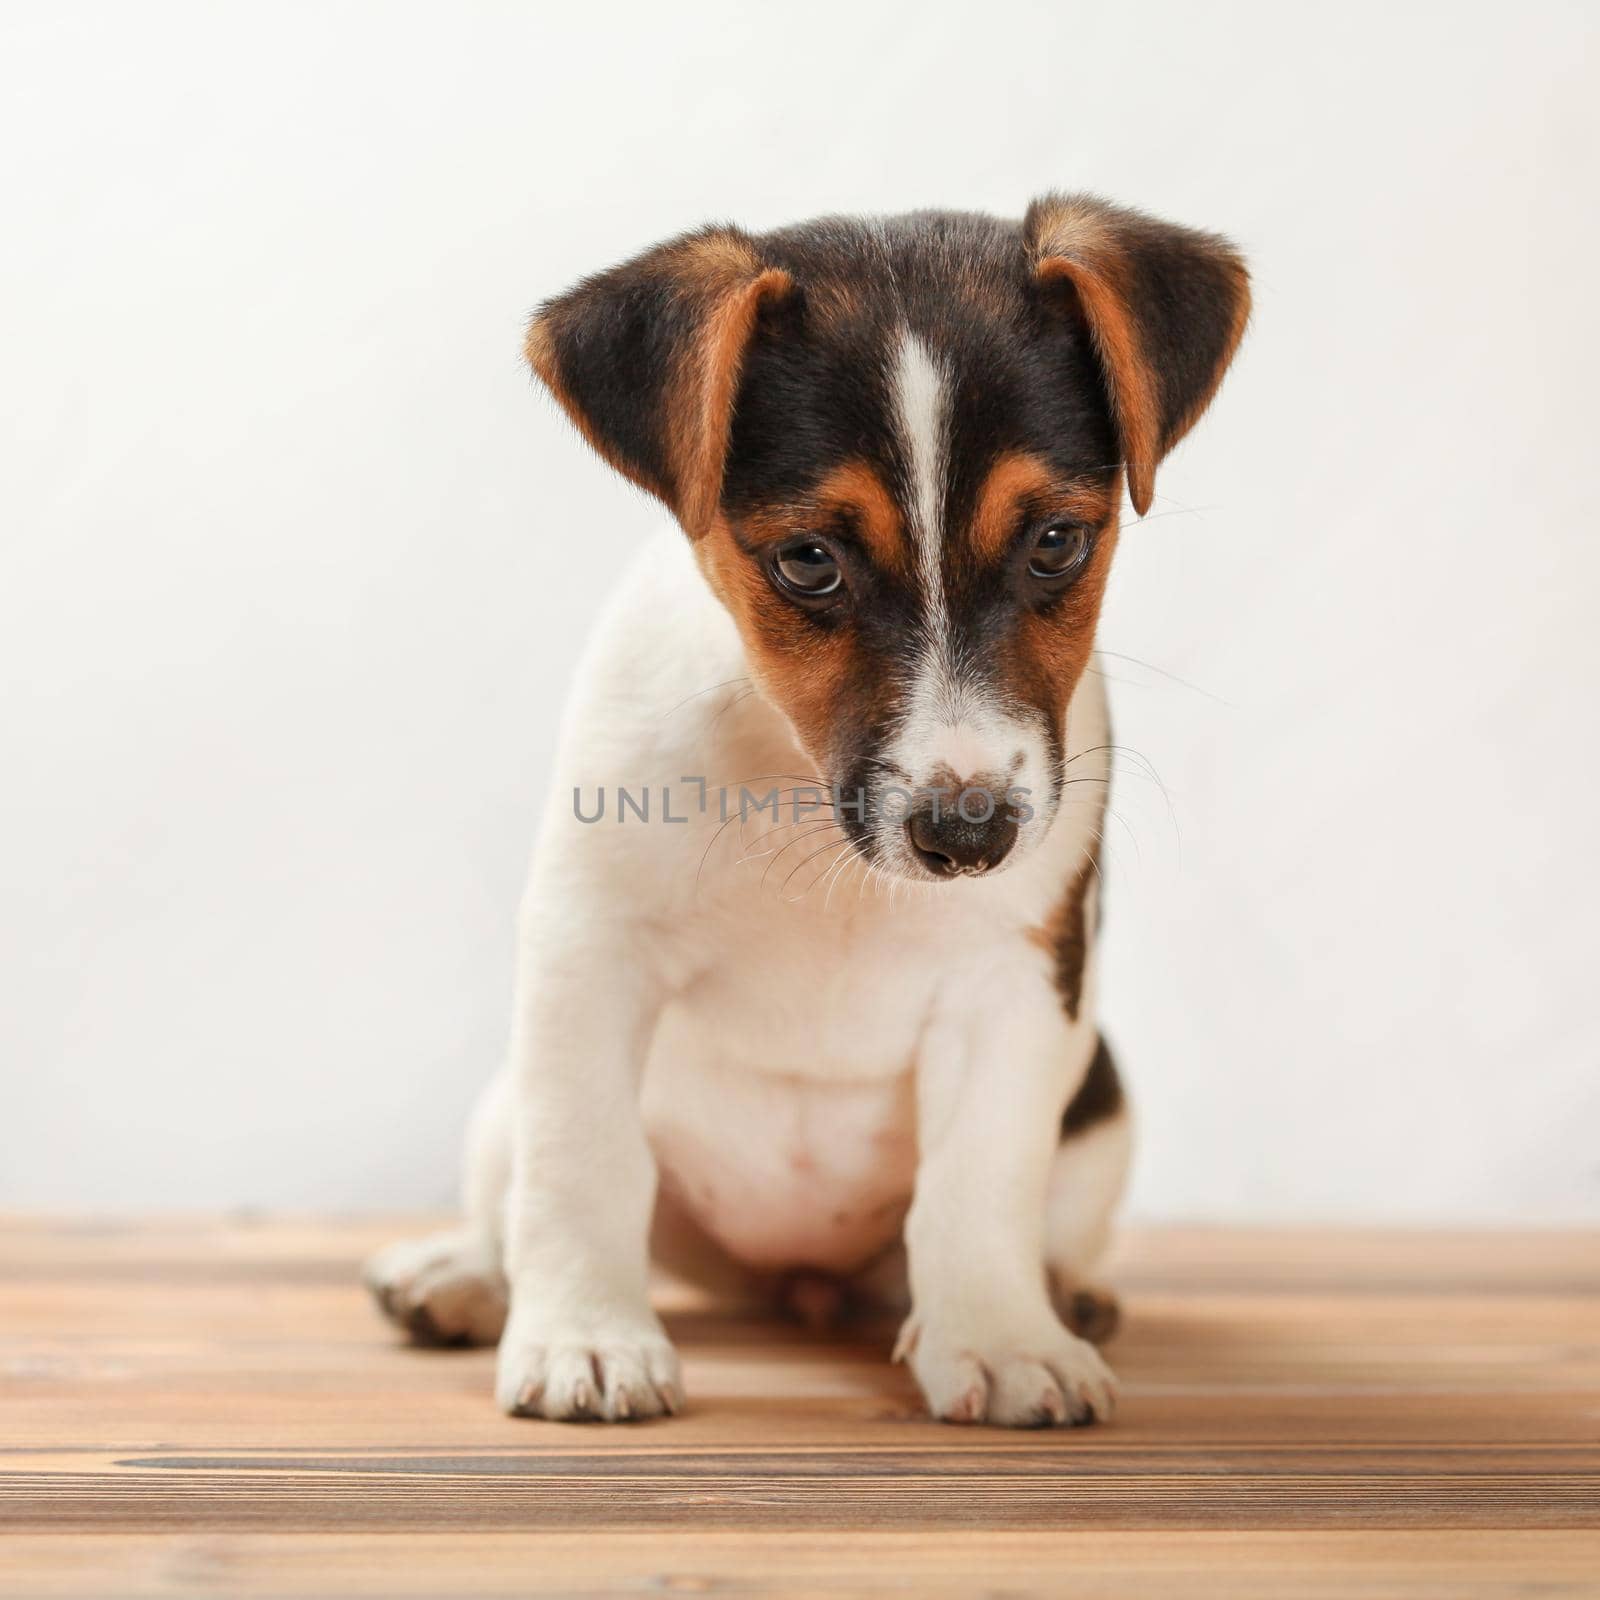 Two months old Jack Russell terrier puppy, shy, looking down, standing on board floor with white background.